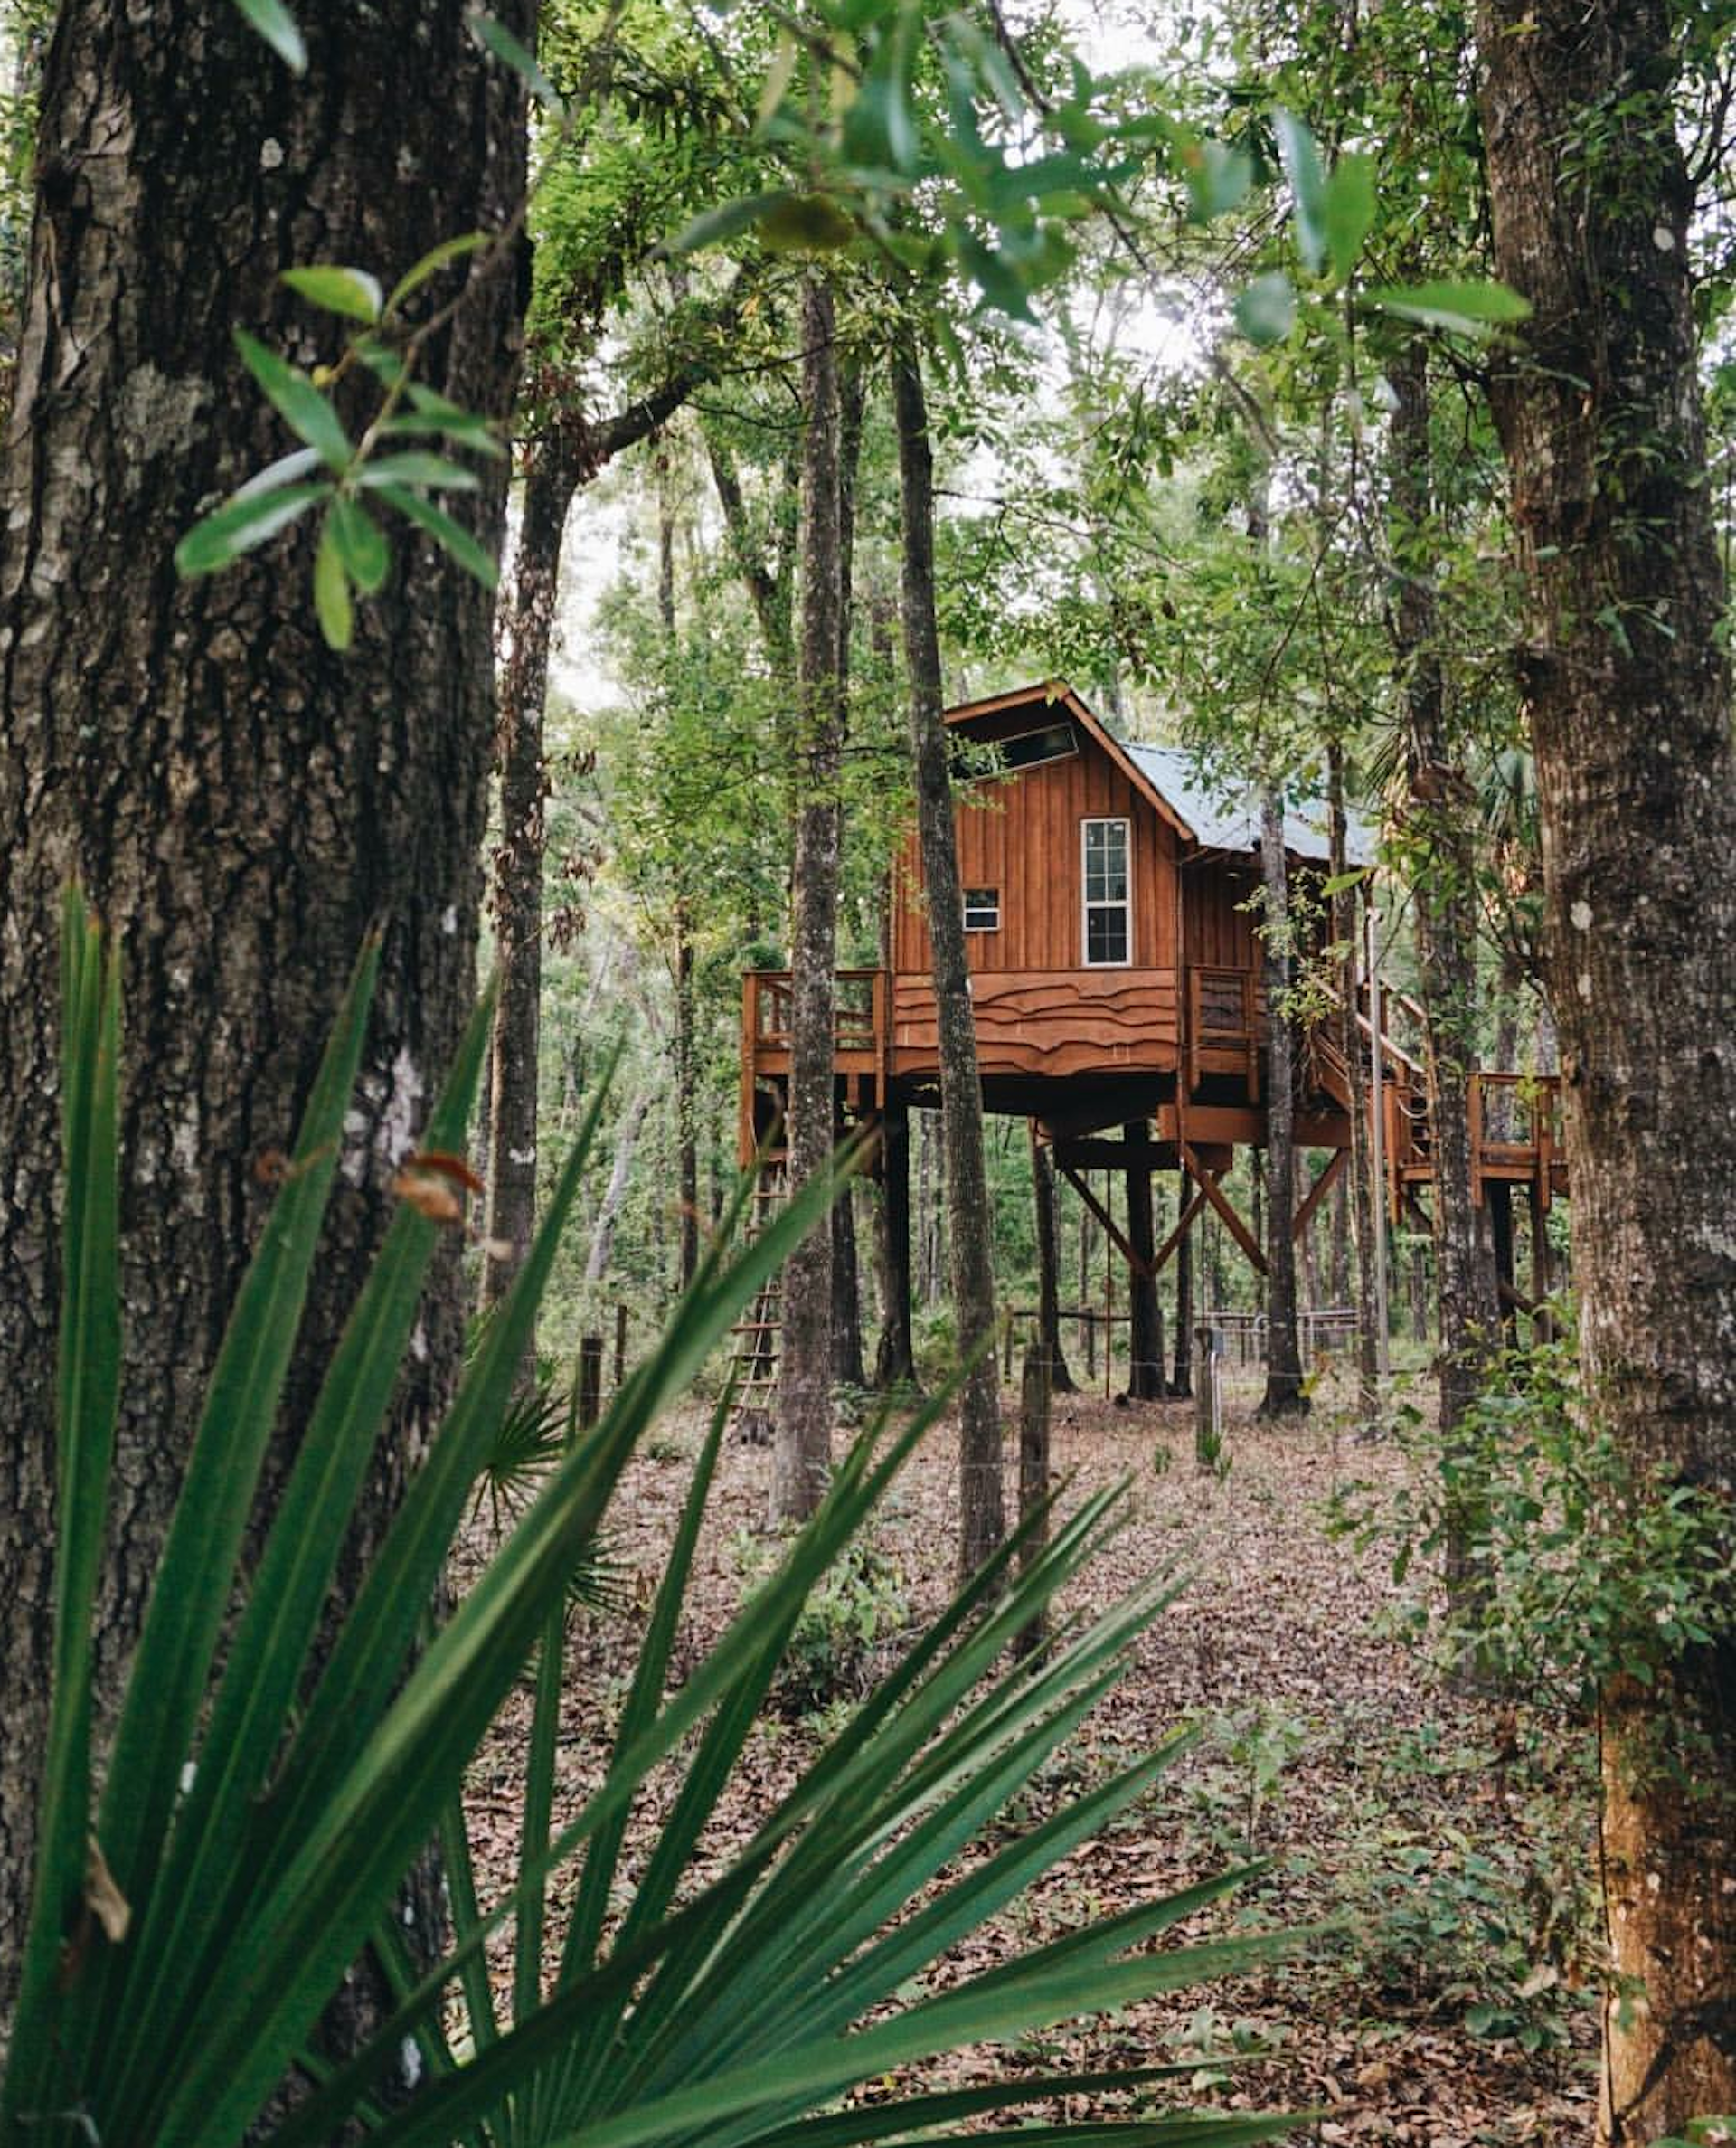 A tree house stands in a dense forest near Old Town, Florida